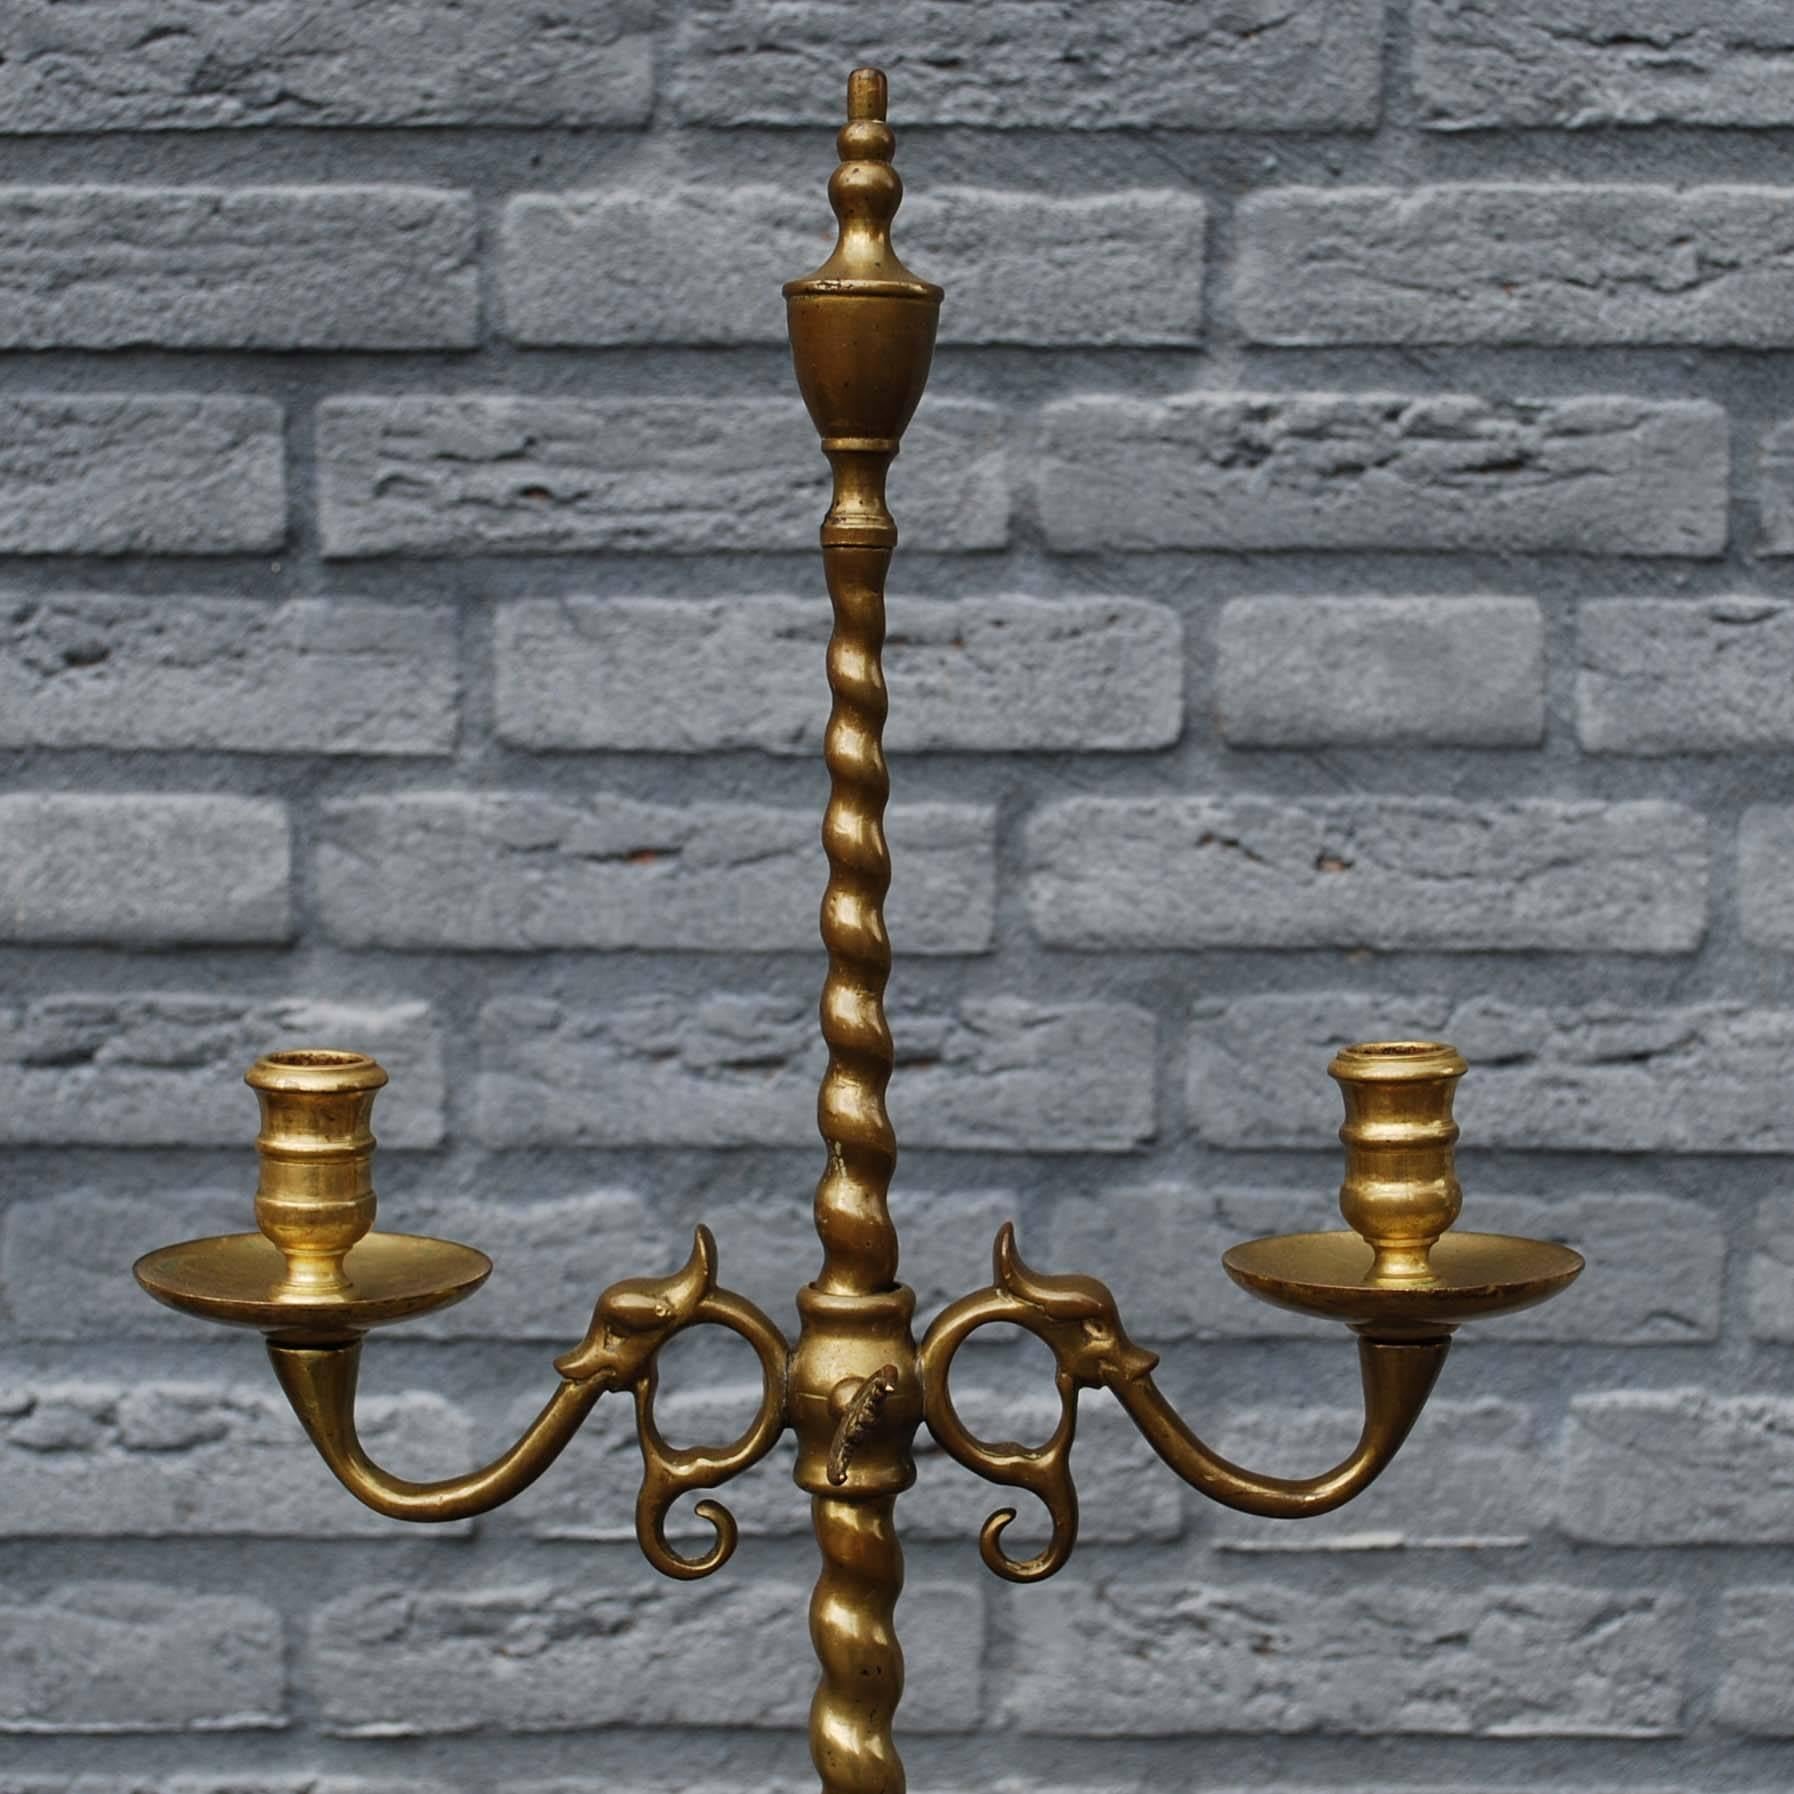 Beautiful hand-forged brass candleholder or candelabra.
It has a tripod base with half turned twist legs that supports a solid turned twist column with a finial urn on top.
It features two rotating candleholders that swivel over the column.
It